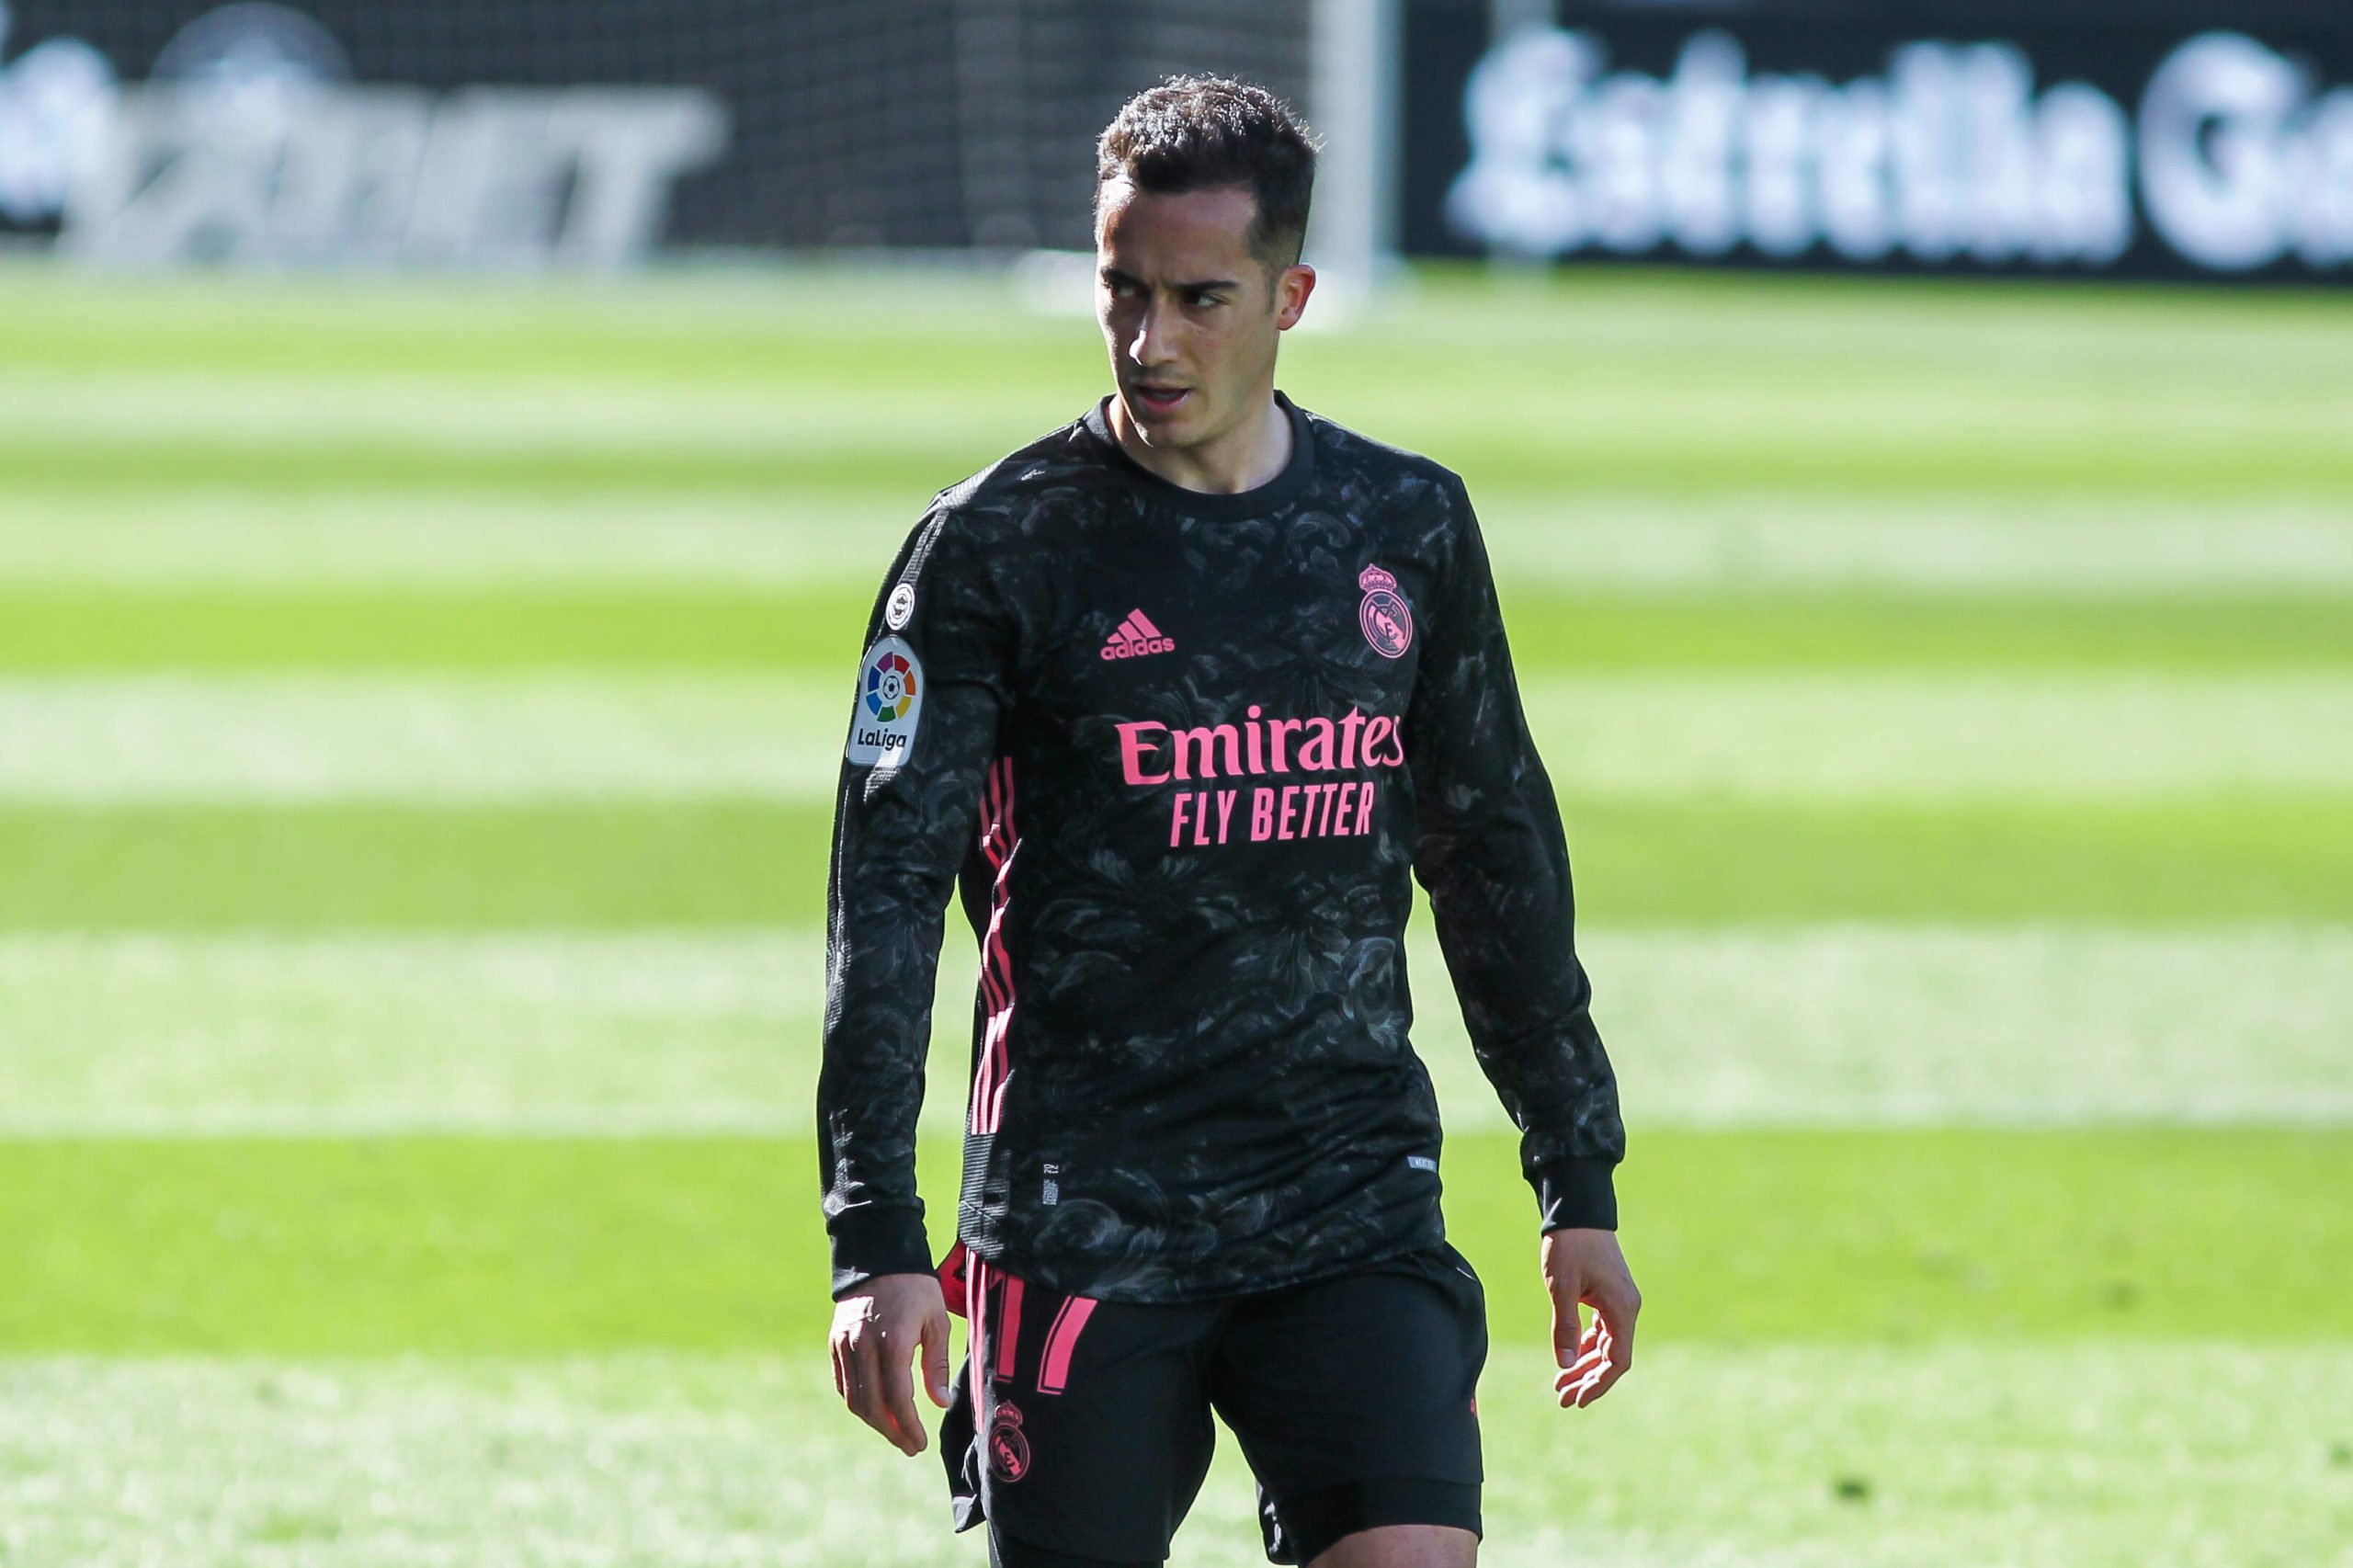 Real Madrid's Vazquez close to penning a three-year deal (Vazquez is seen in the photo)